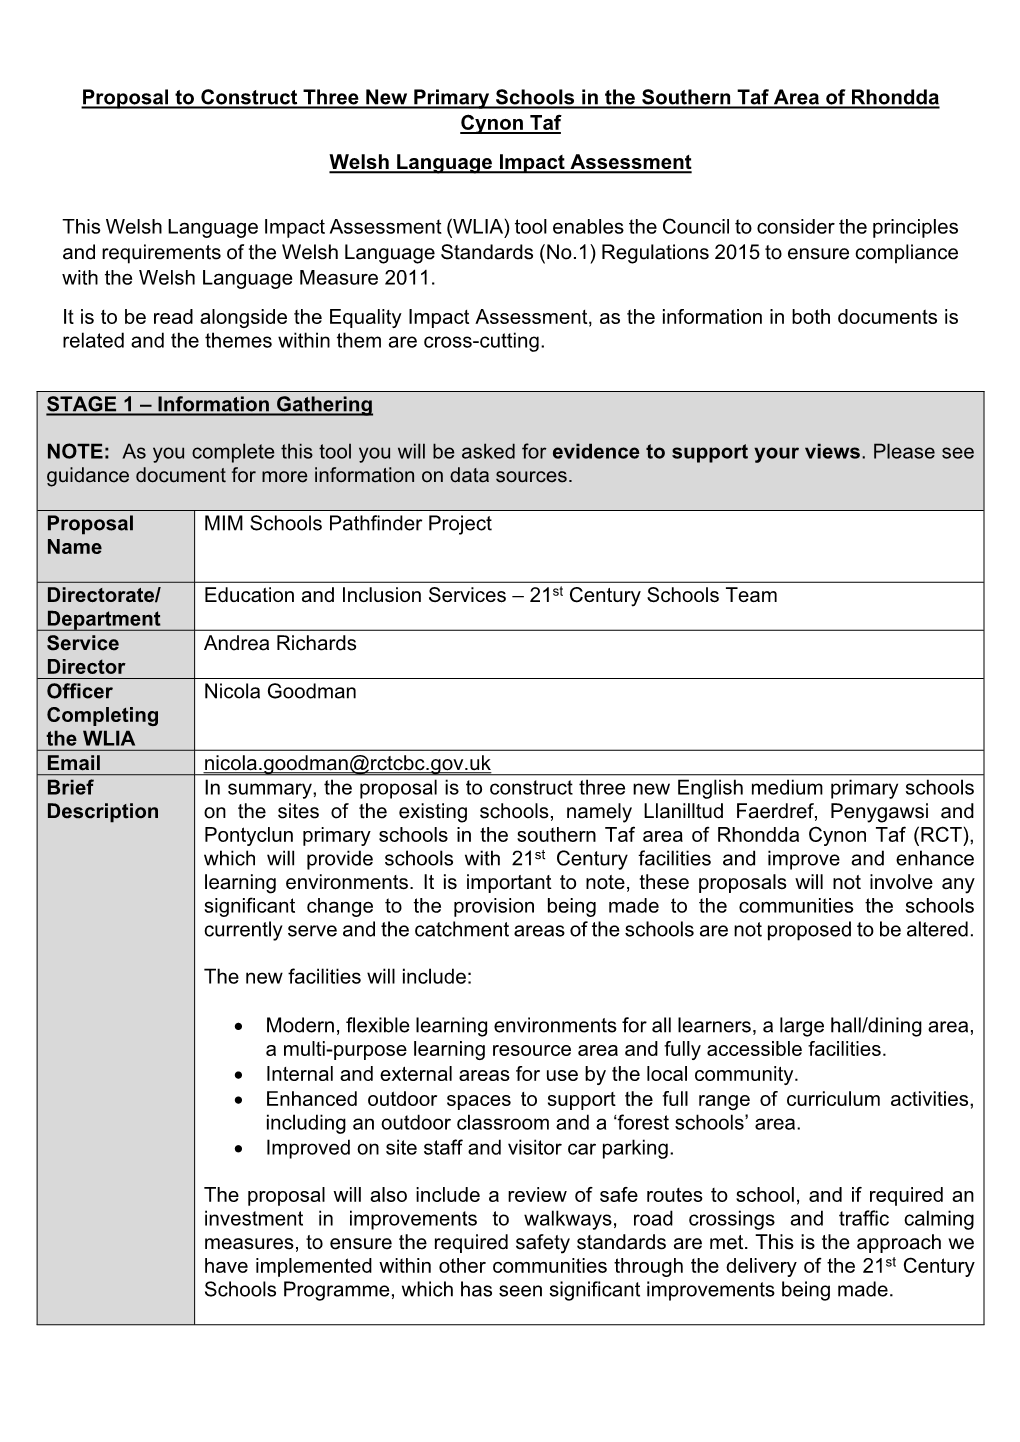 Proposal to Construct Three New Primary Schools in the Southern Taf Area of Rhondda Cynon Taf Welsh Language Impact Assessment